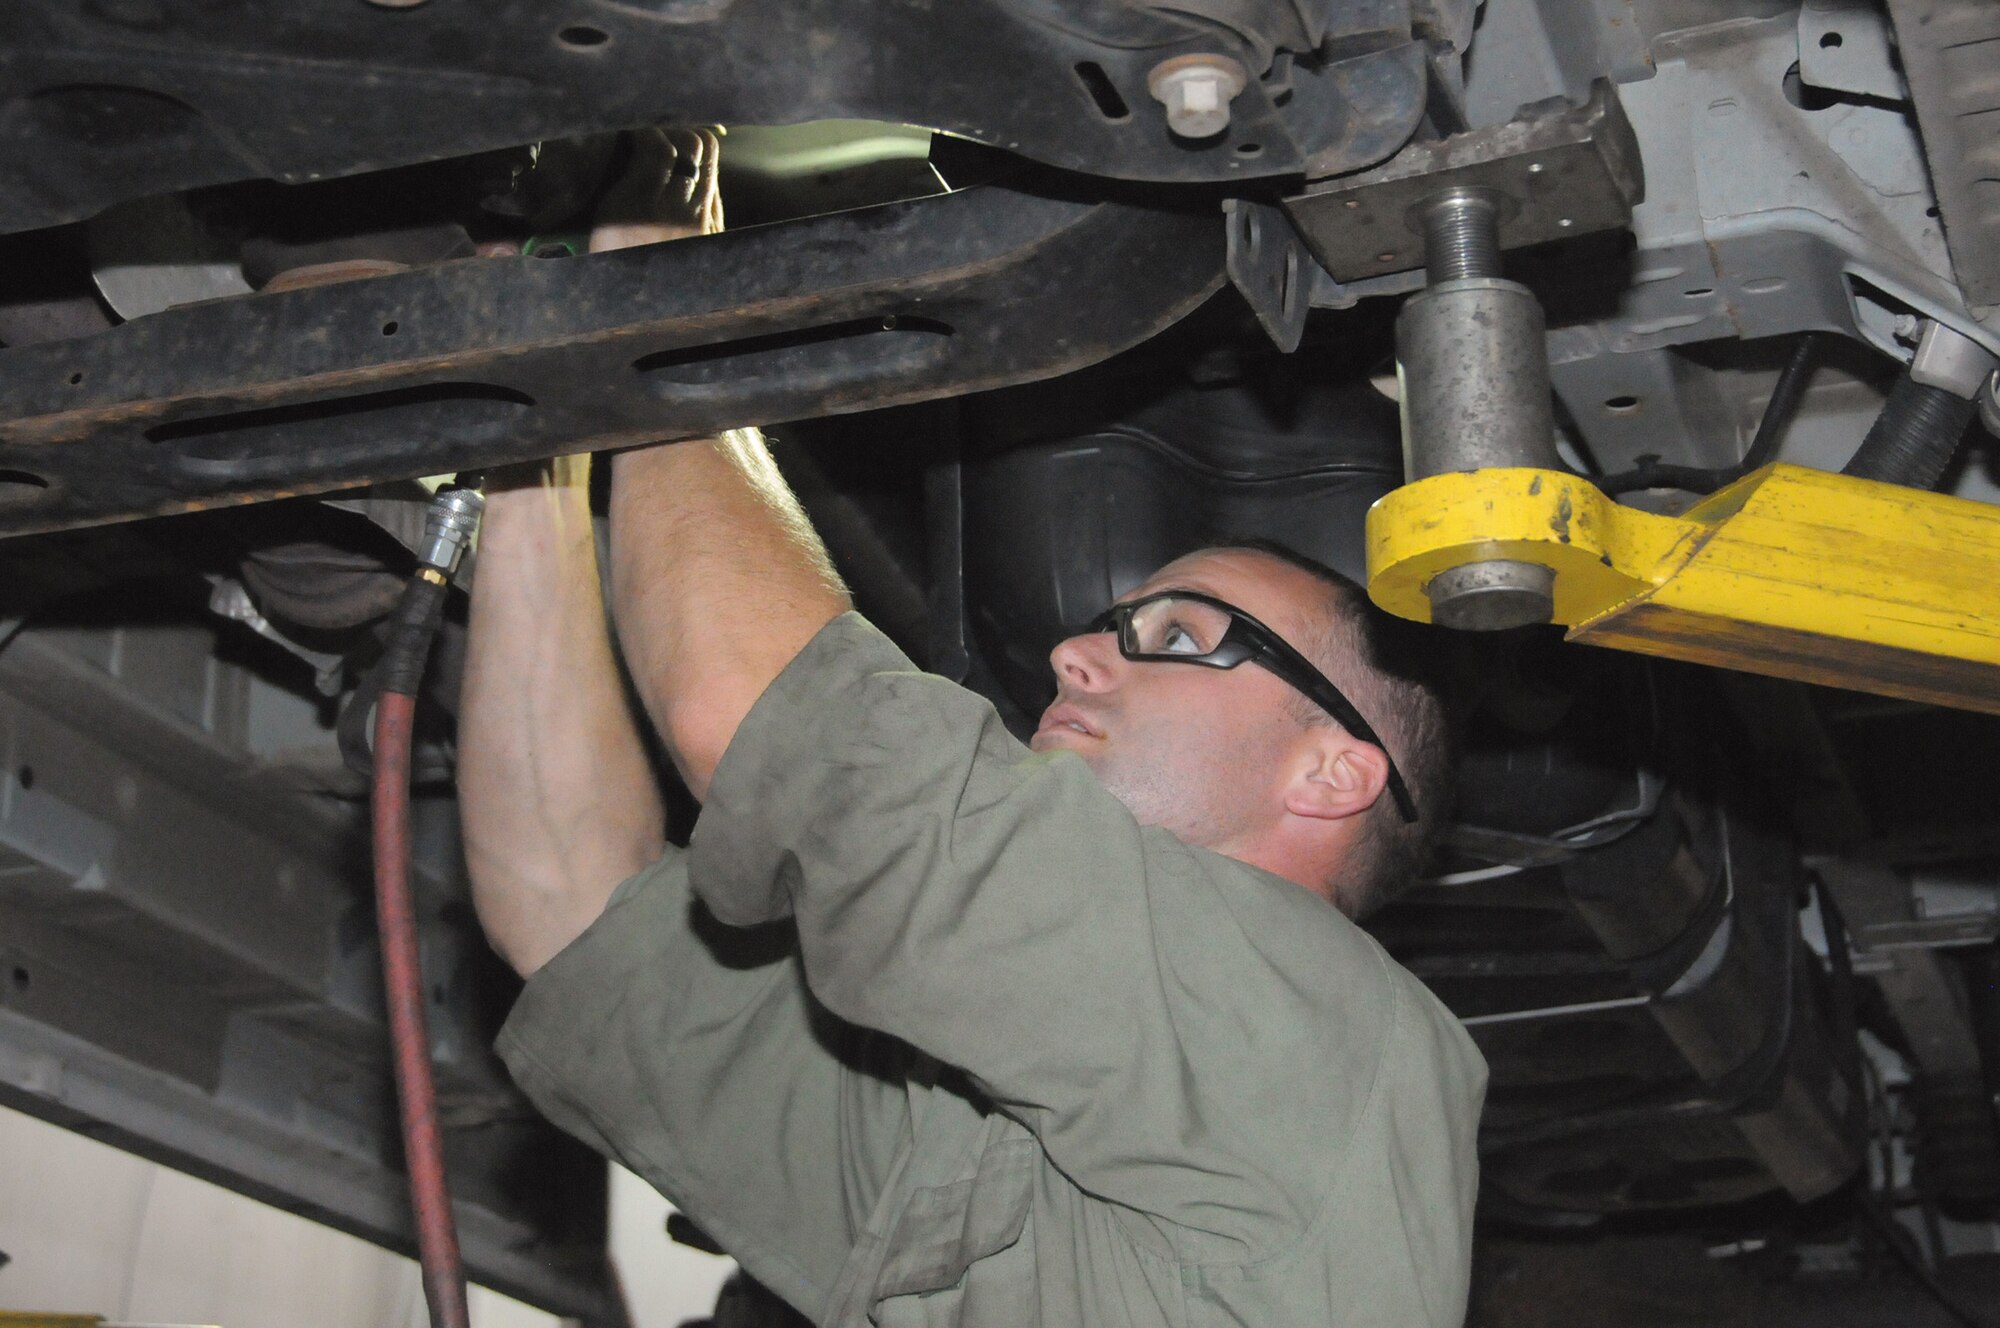 Tech. Sgt. Taylor Harnist, vehicle maintenance journeyman with the 445th Logistics Readiness Squadron, repairs a vehicle at Germain Ford of Beavercreek. Germain Ford established a program with LRS to provide hands-on training to LRS Airmen.